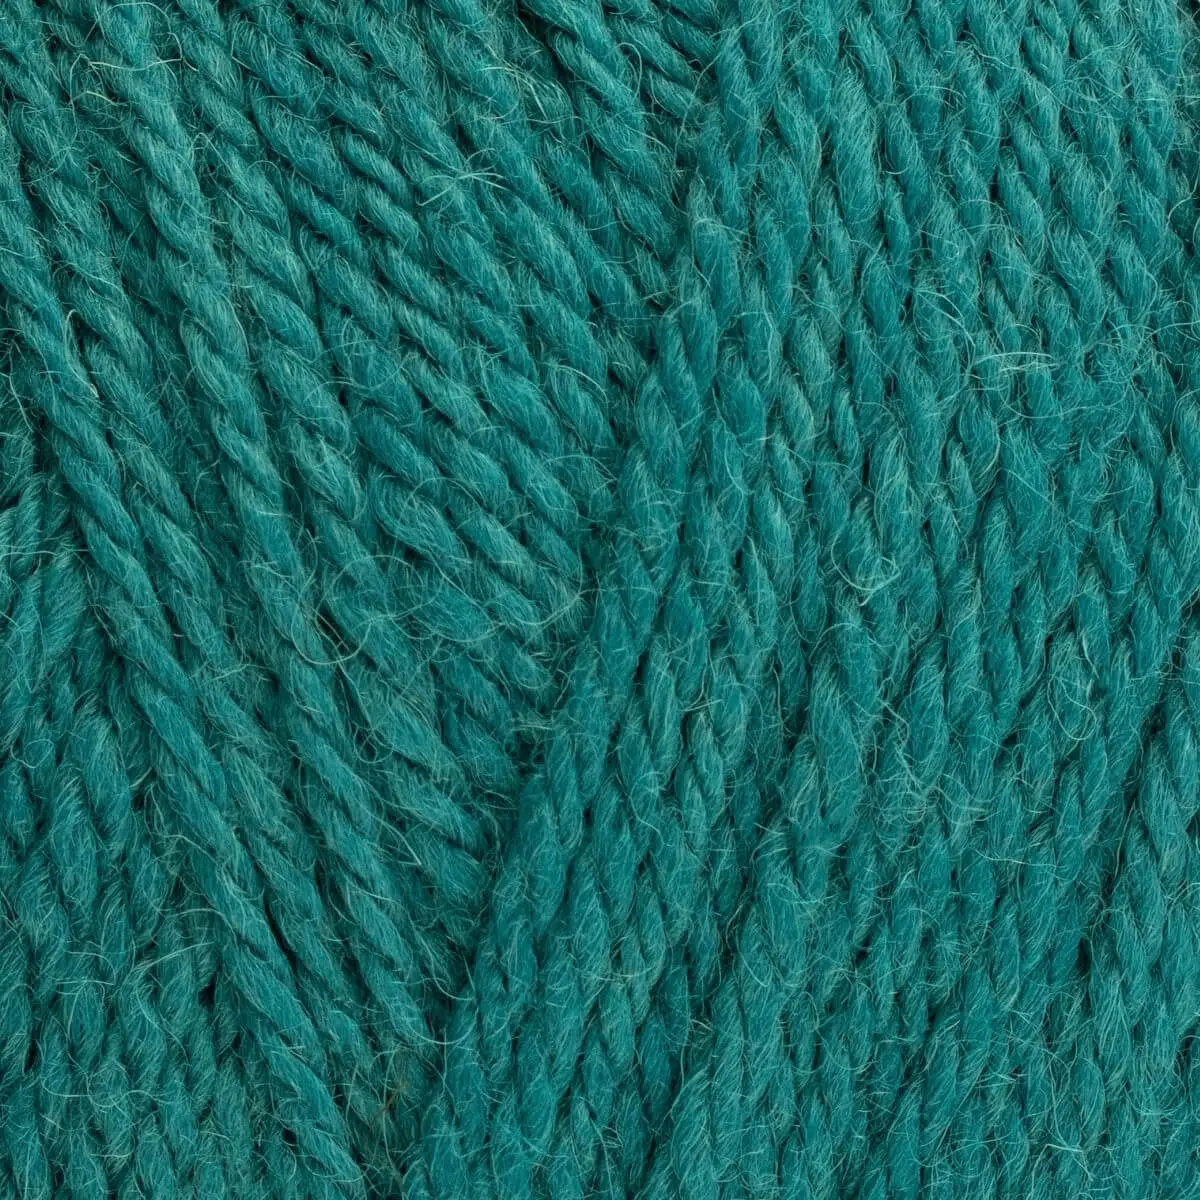 West Yorkshire Spinners - ColourLab Aran - 1175 True Teal